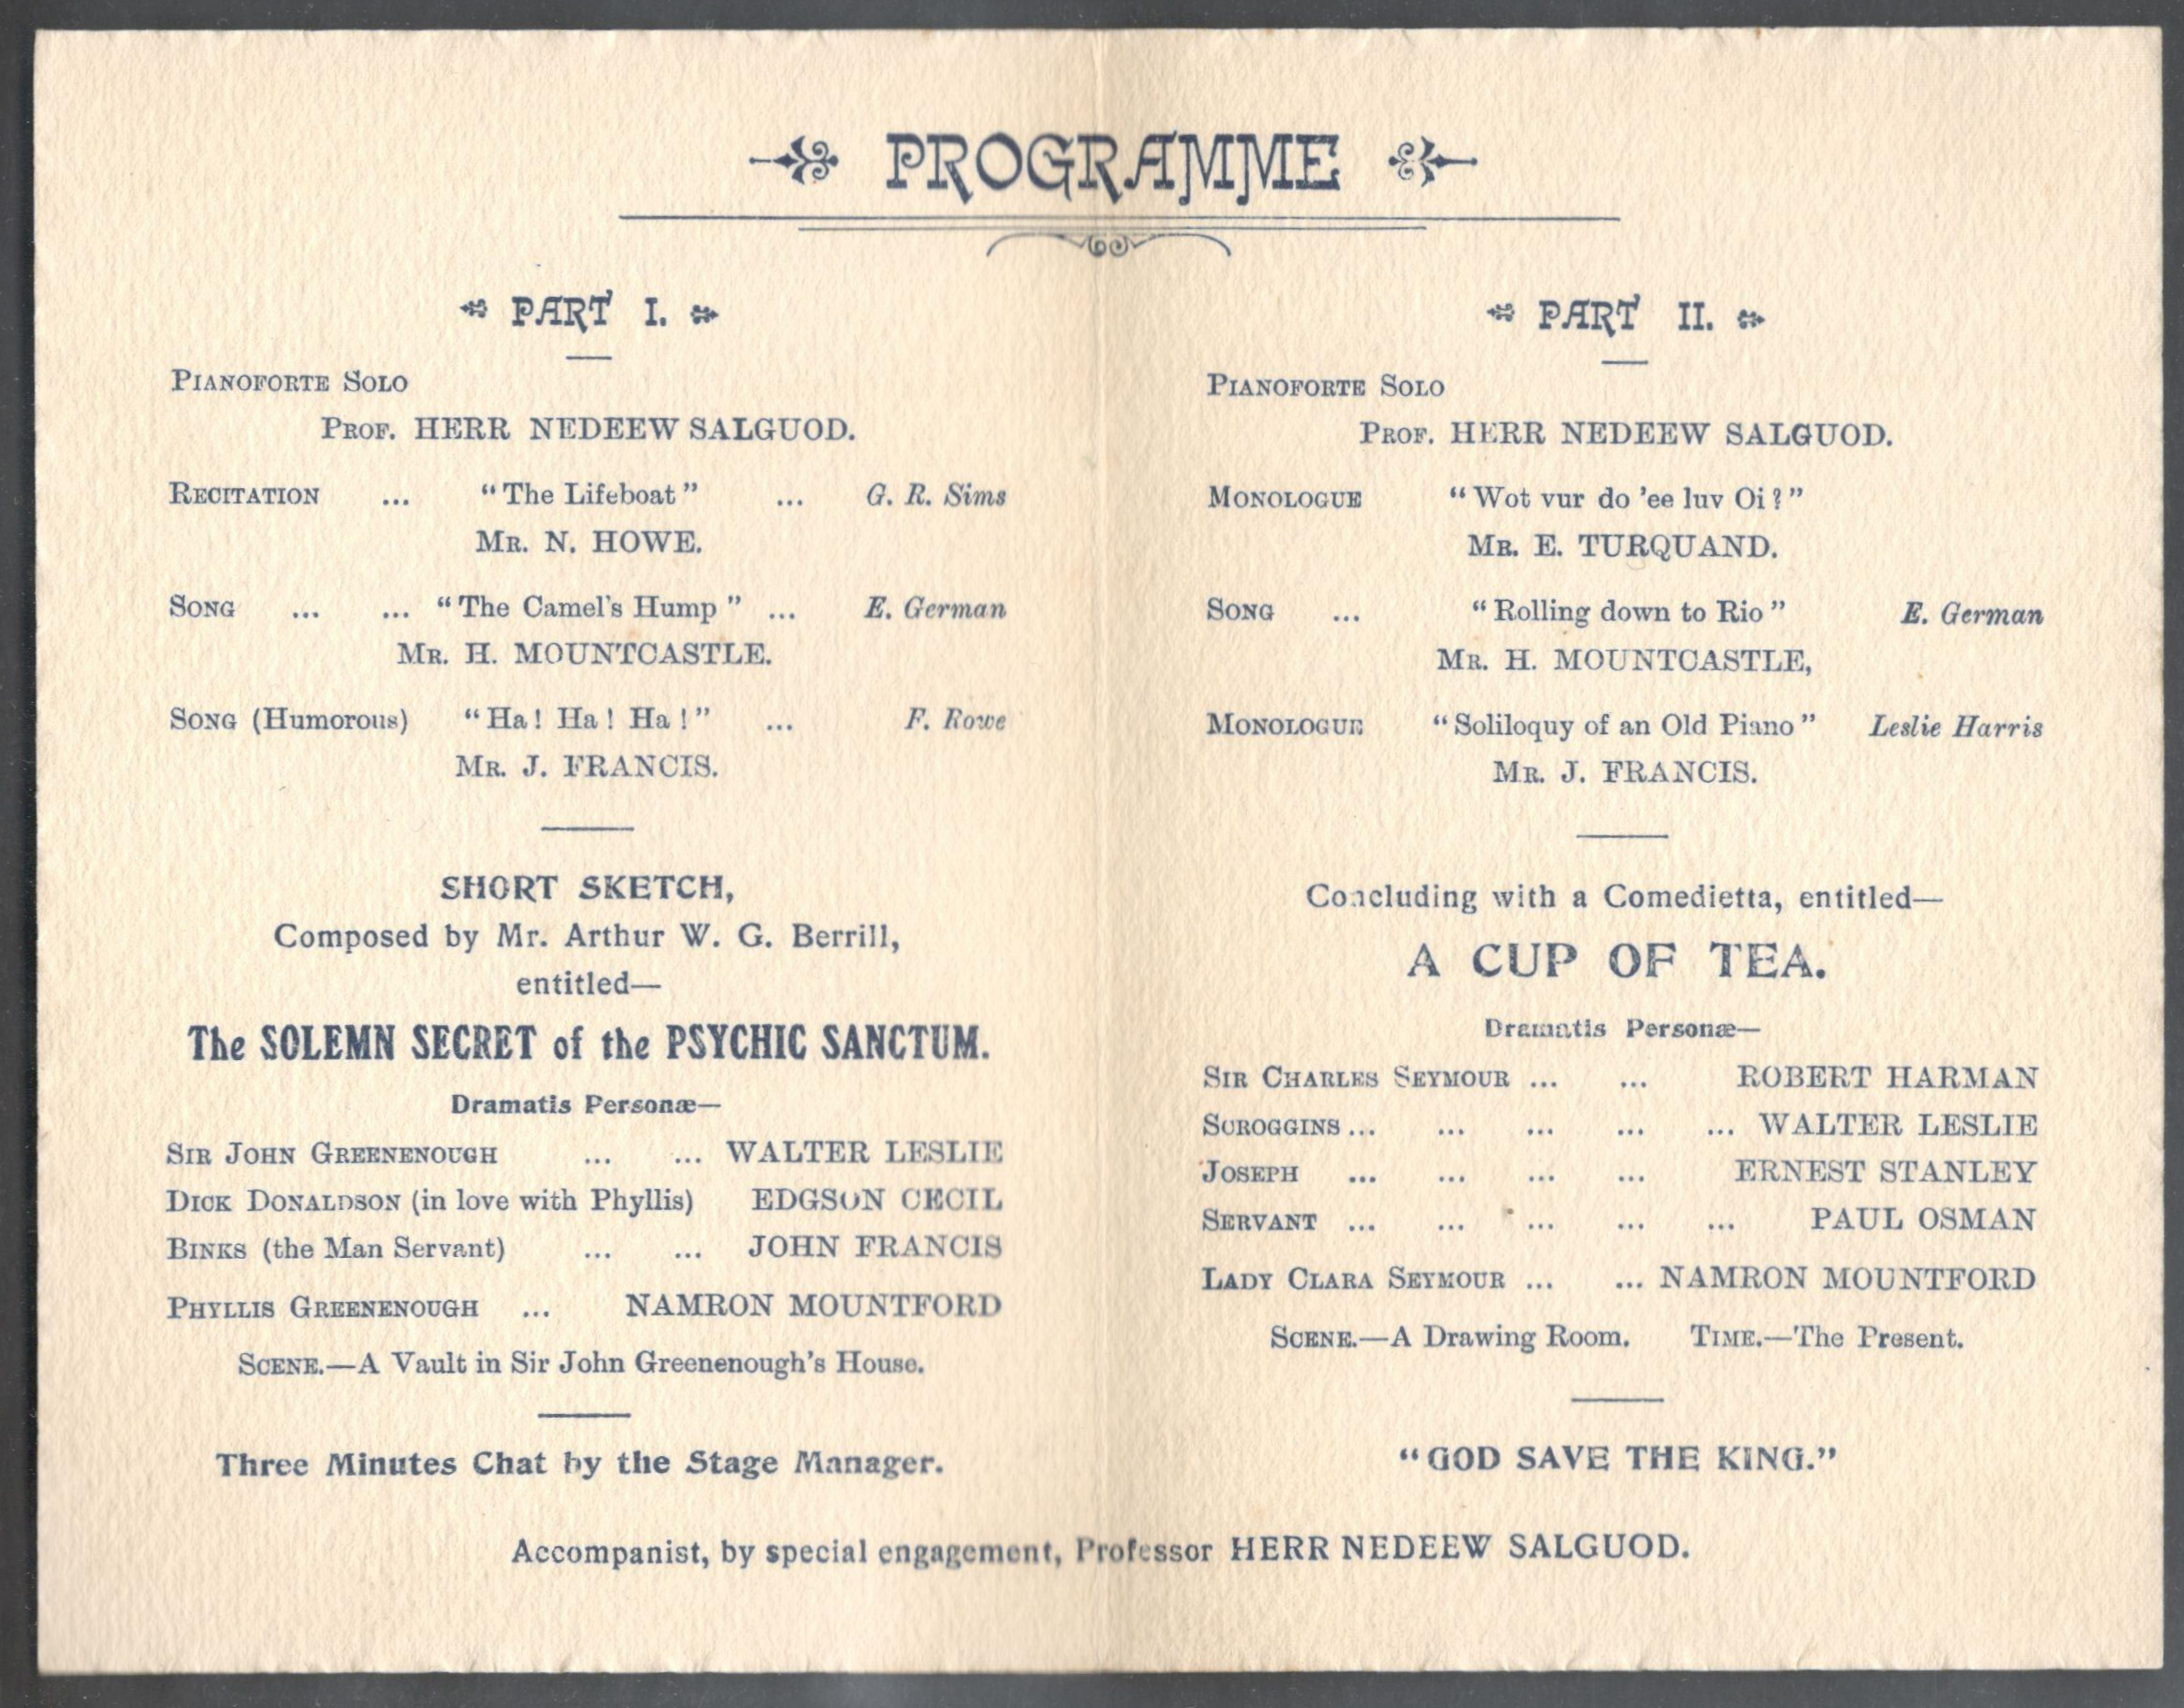 M.H.C.S.S. TEMPERANCE BAND 1910 THE FRAMBBTKWHS PROGRAMME - Image 2 of 2